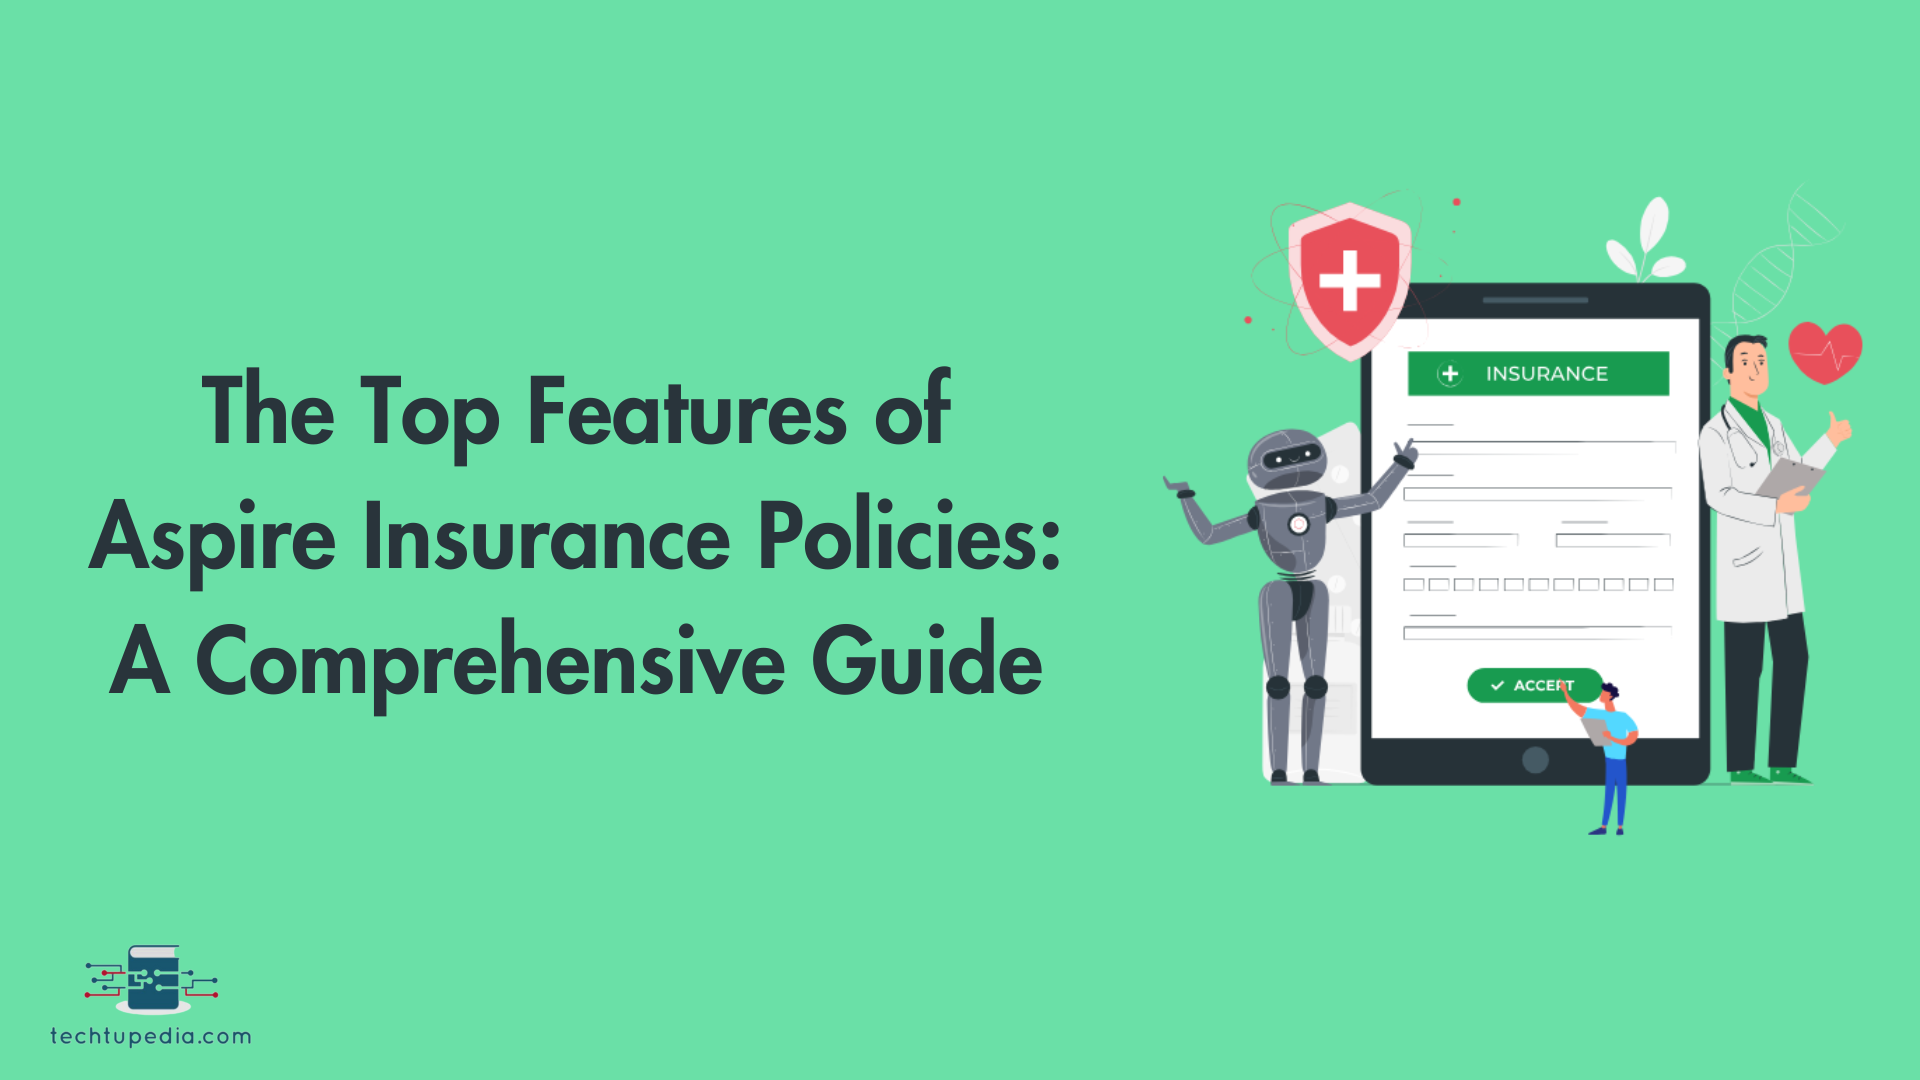 The Top Features of Aspire Insurance Policies: A Comprehensive Guide